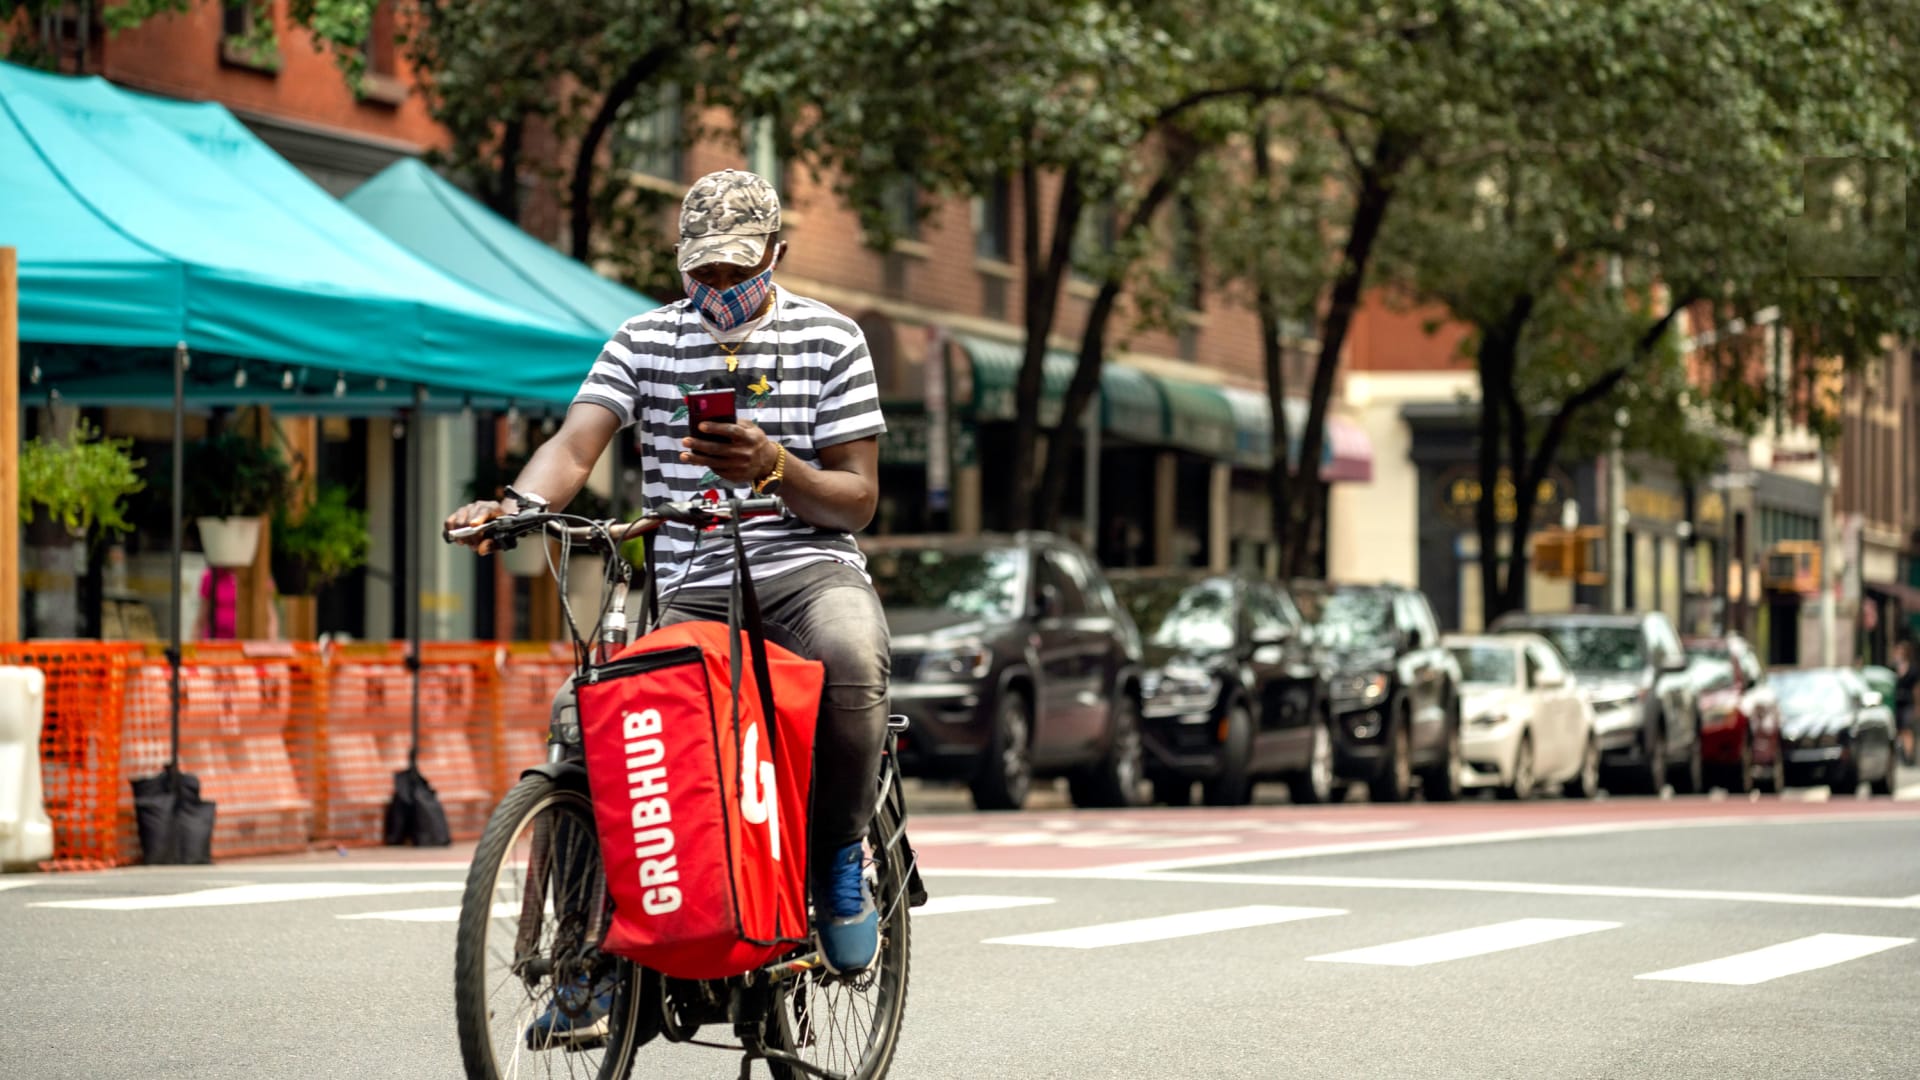 A Grubhub food delivery person rides on Manhattan's Upper East Side.